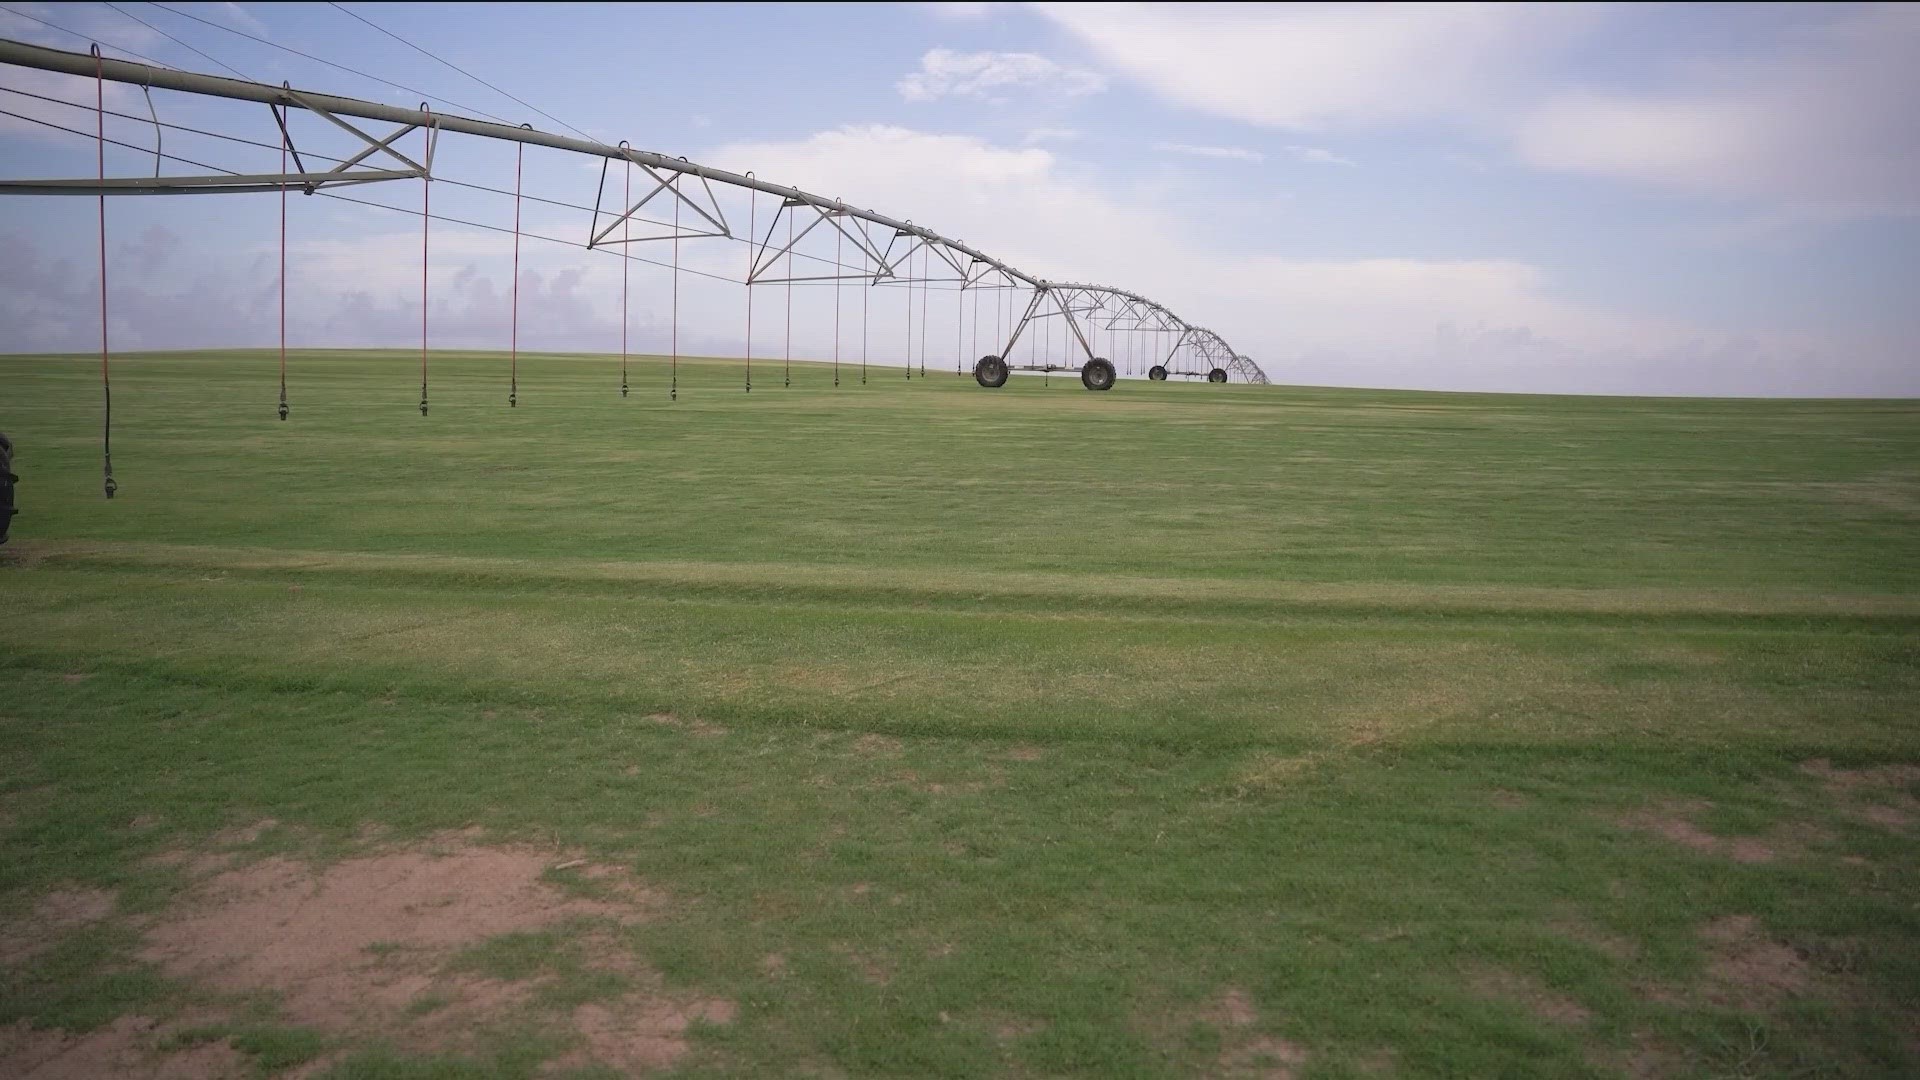 People living in rural Bastrop County raised concerns about their water wells running dry and pointed to a sod company.